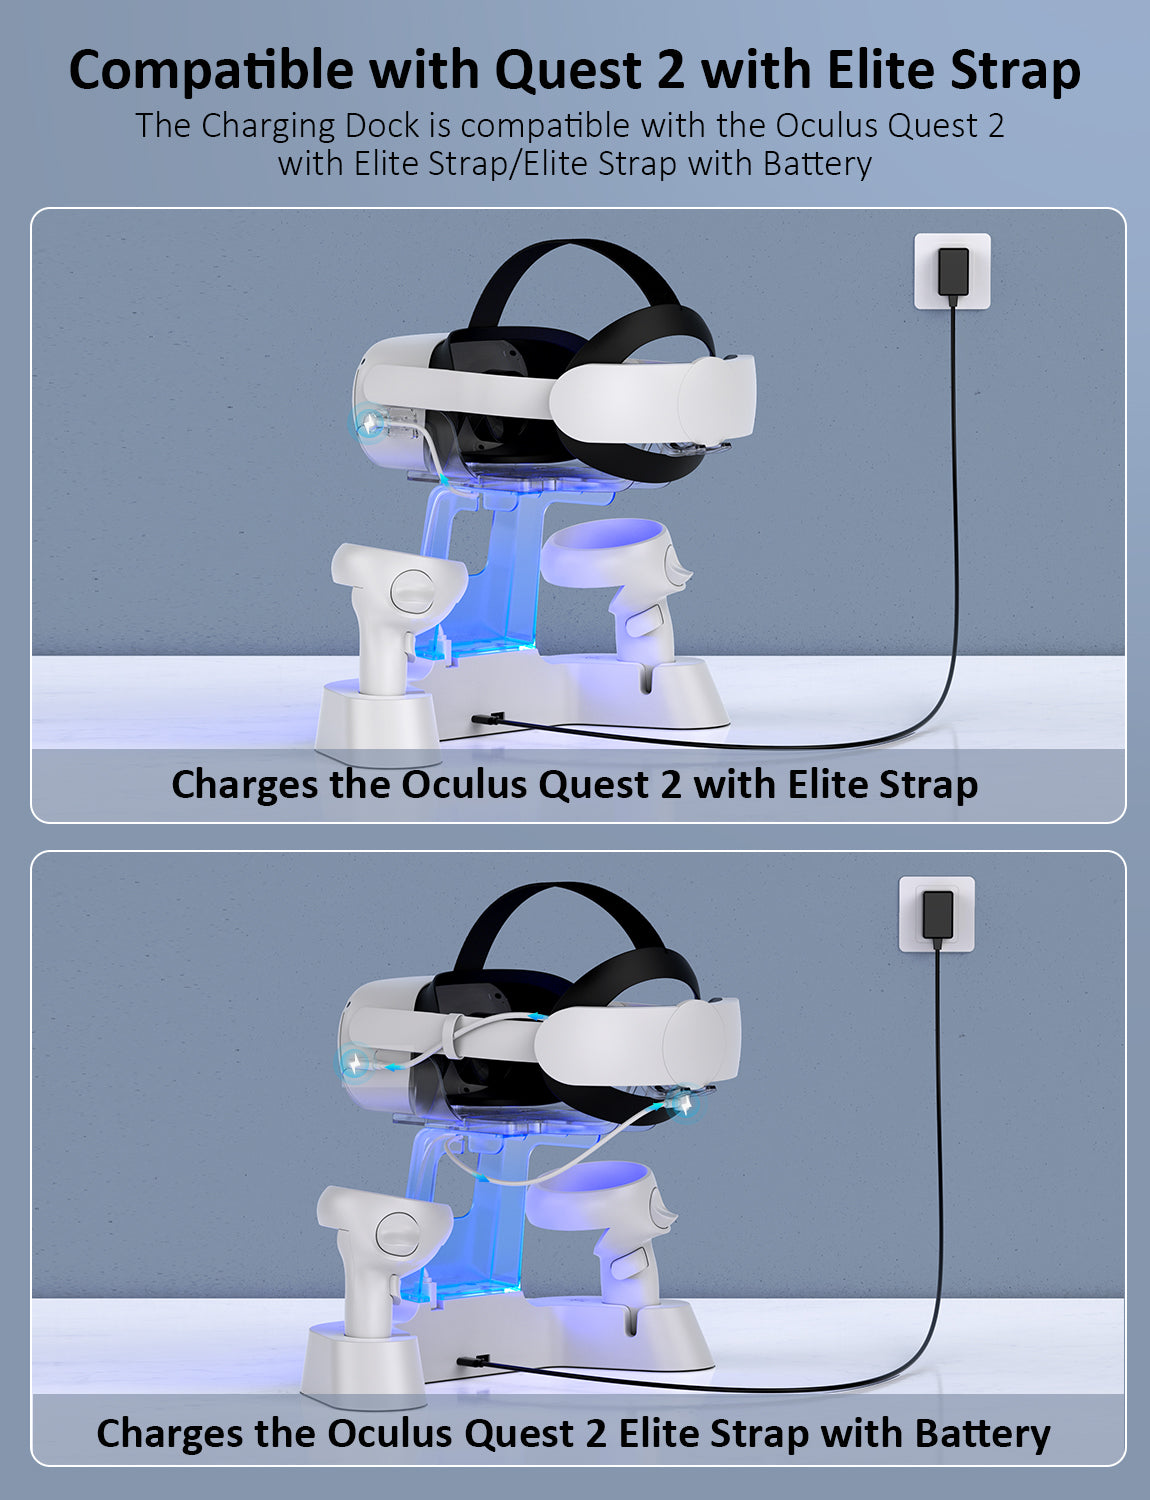 The charging dock charges Quest 2 with Elite strap and Elite strap with battery. 